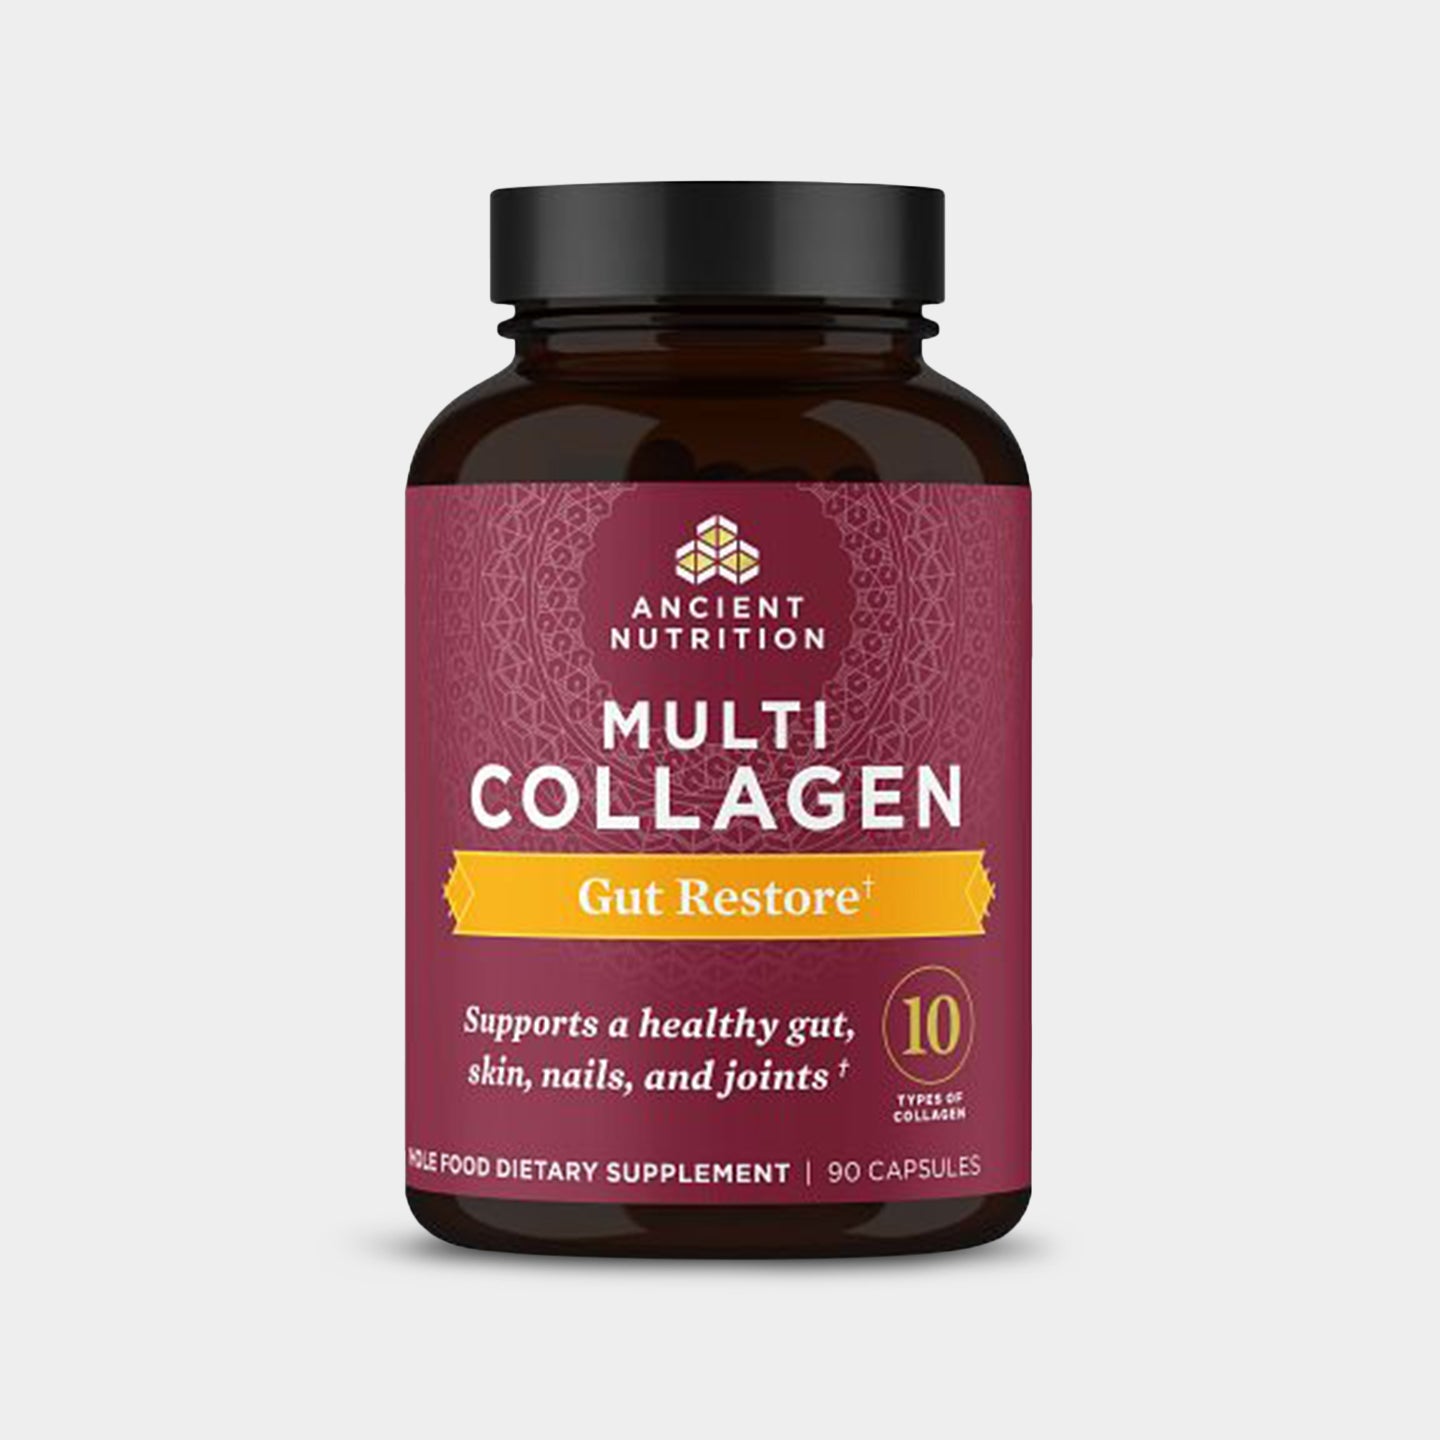 Ancient Nutrition Multi Collagen - Gut Restore, Unflavored, 90 Capsules A1